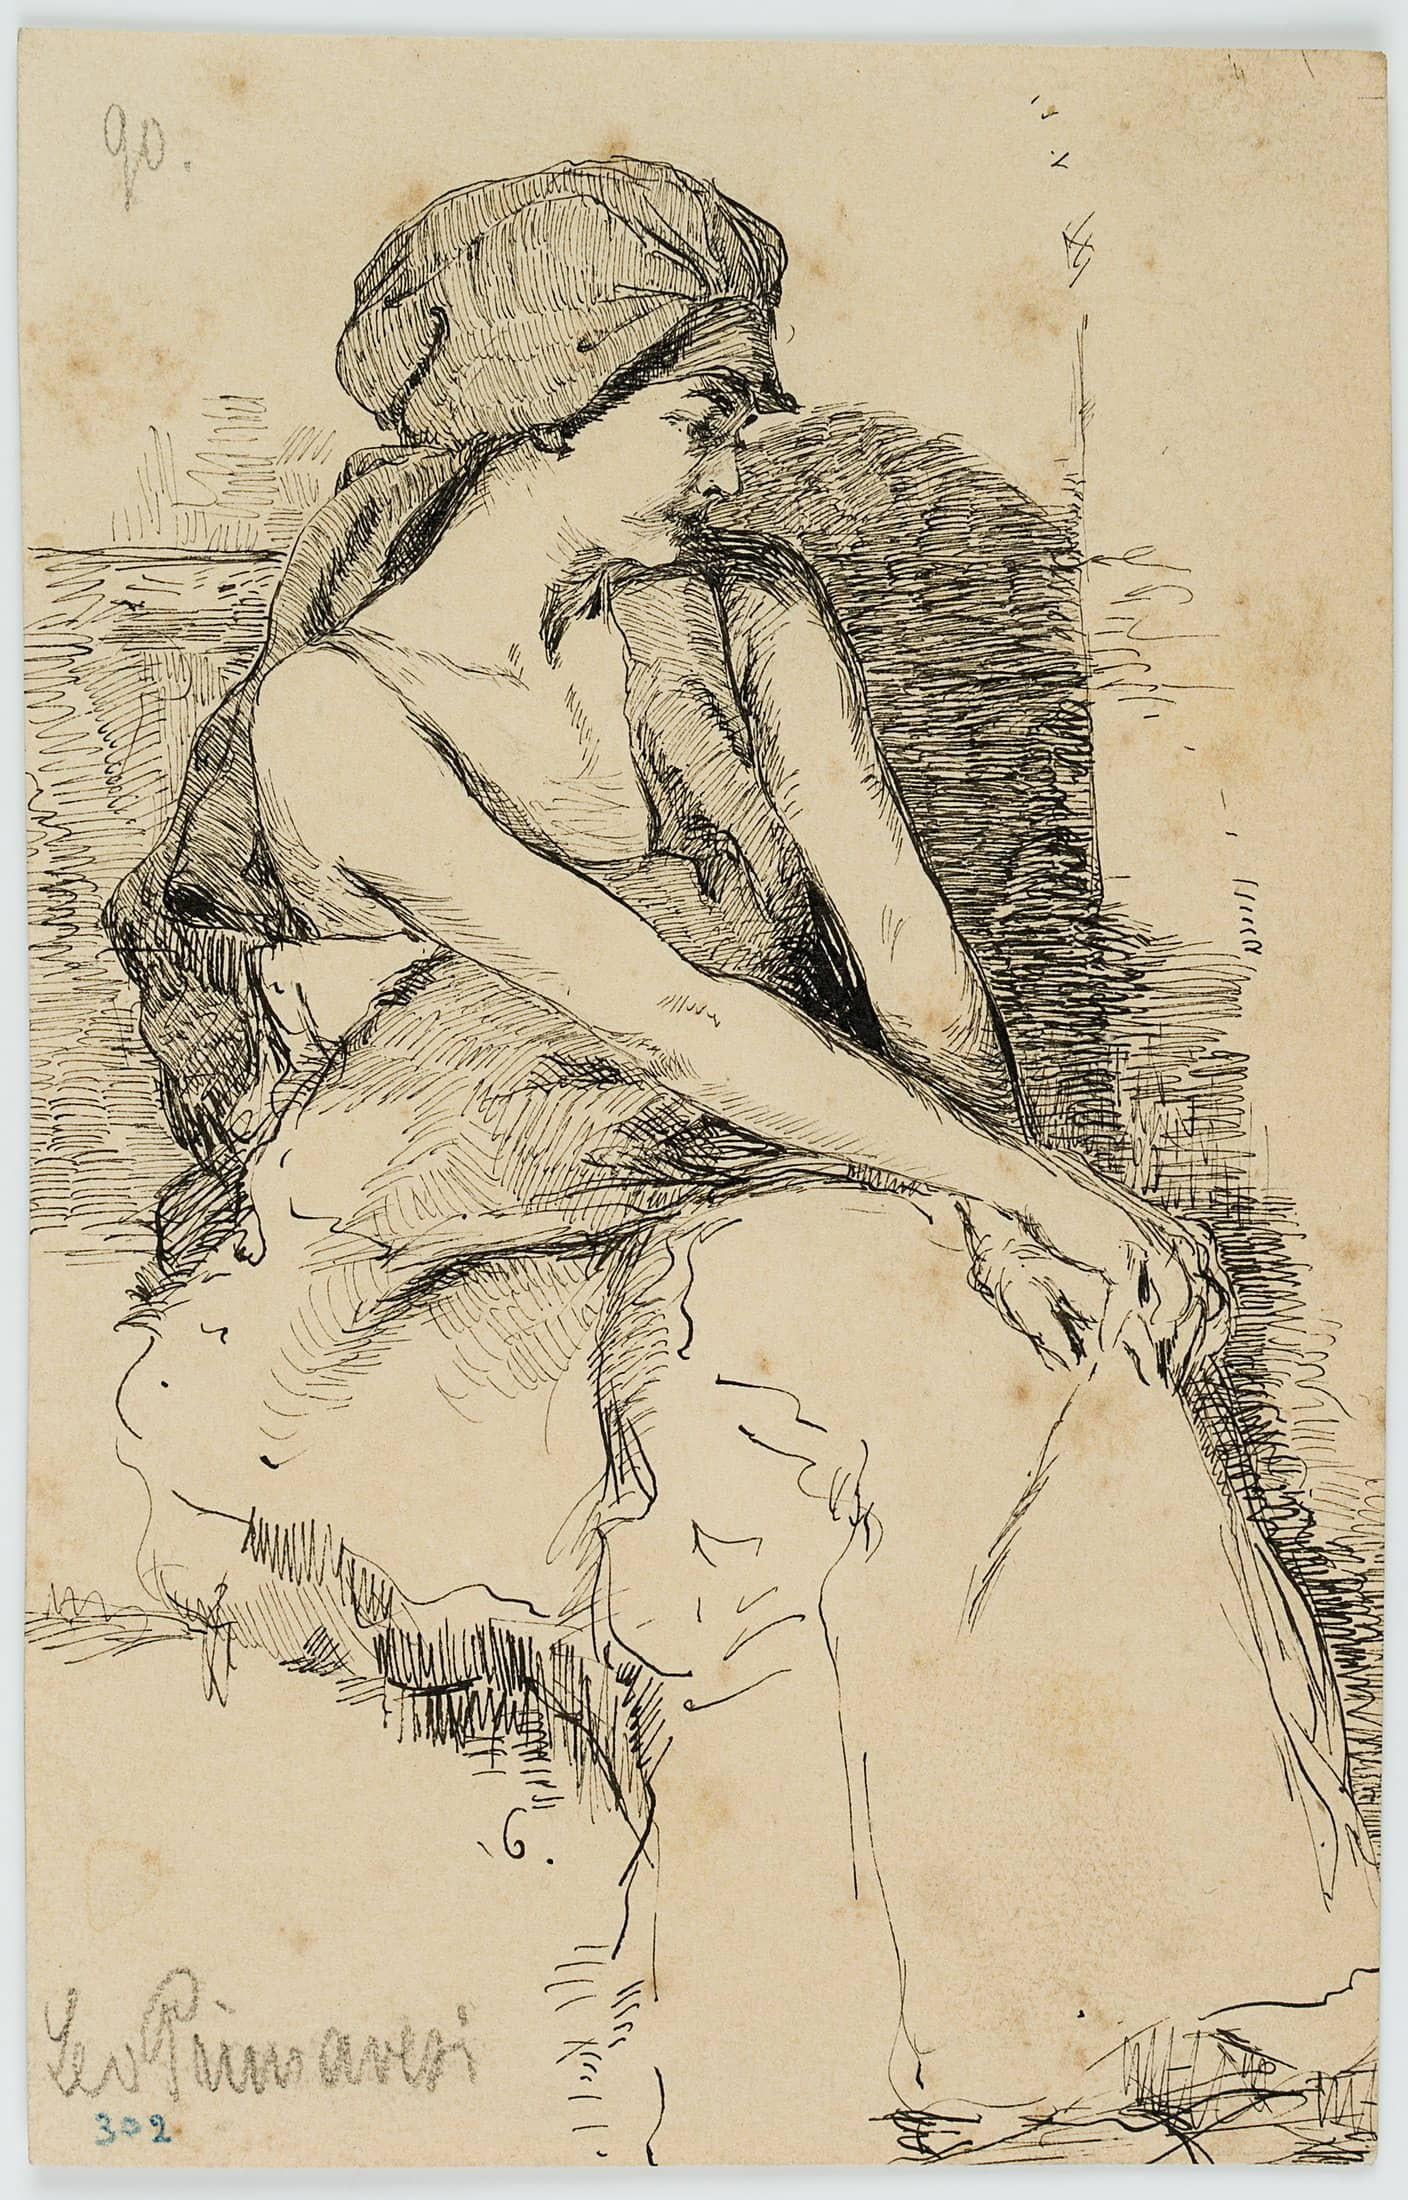 Leo Primavesi (1871 Cologne - after 1937 ): Young Neapolitan, c. 1896, Pen drawing

Technique: Pen drawing on Paper

Inscription: Signed 